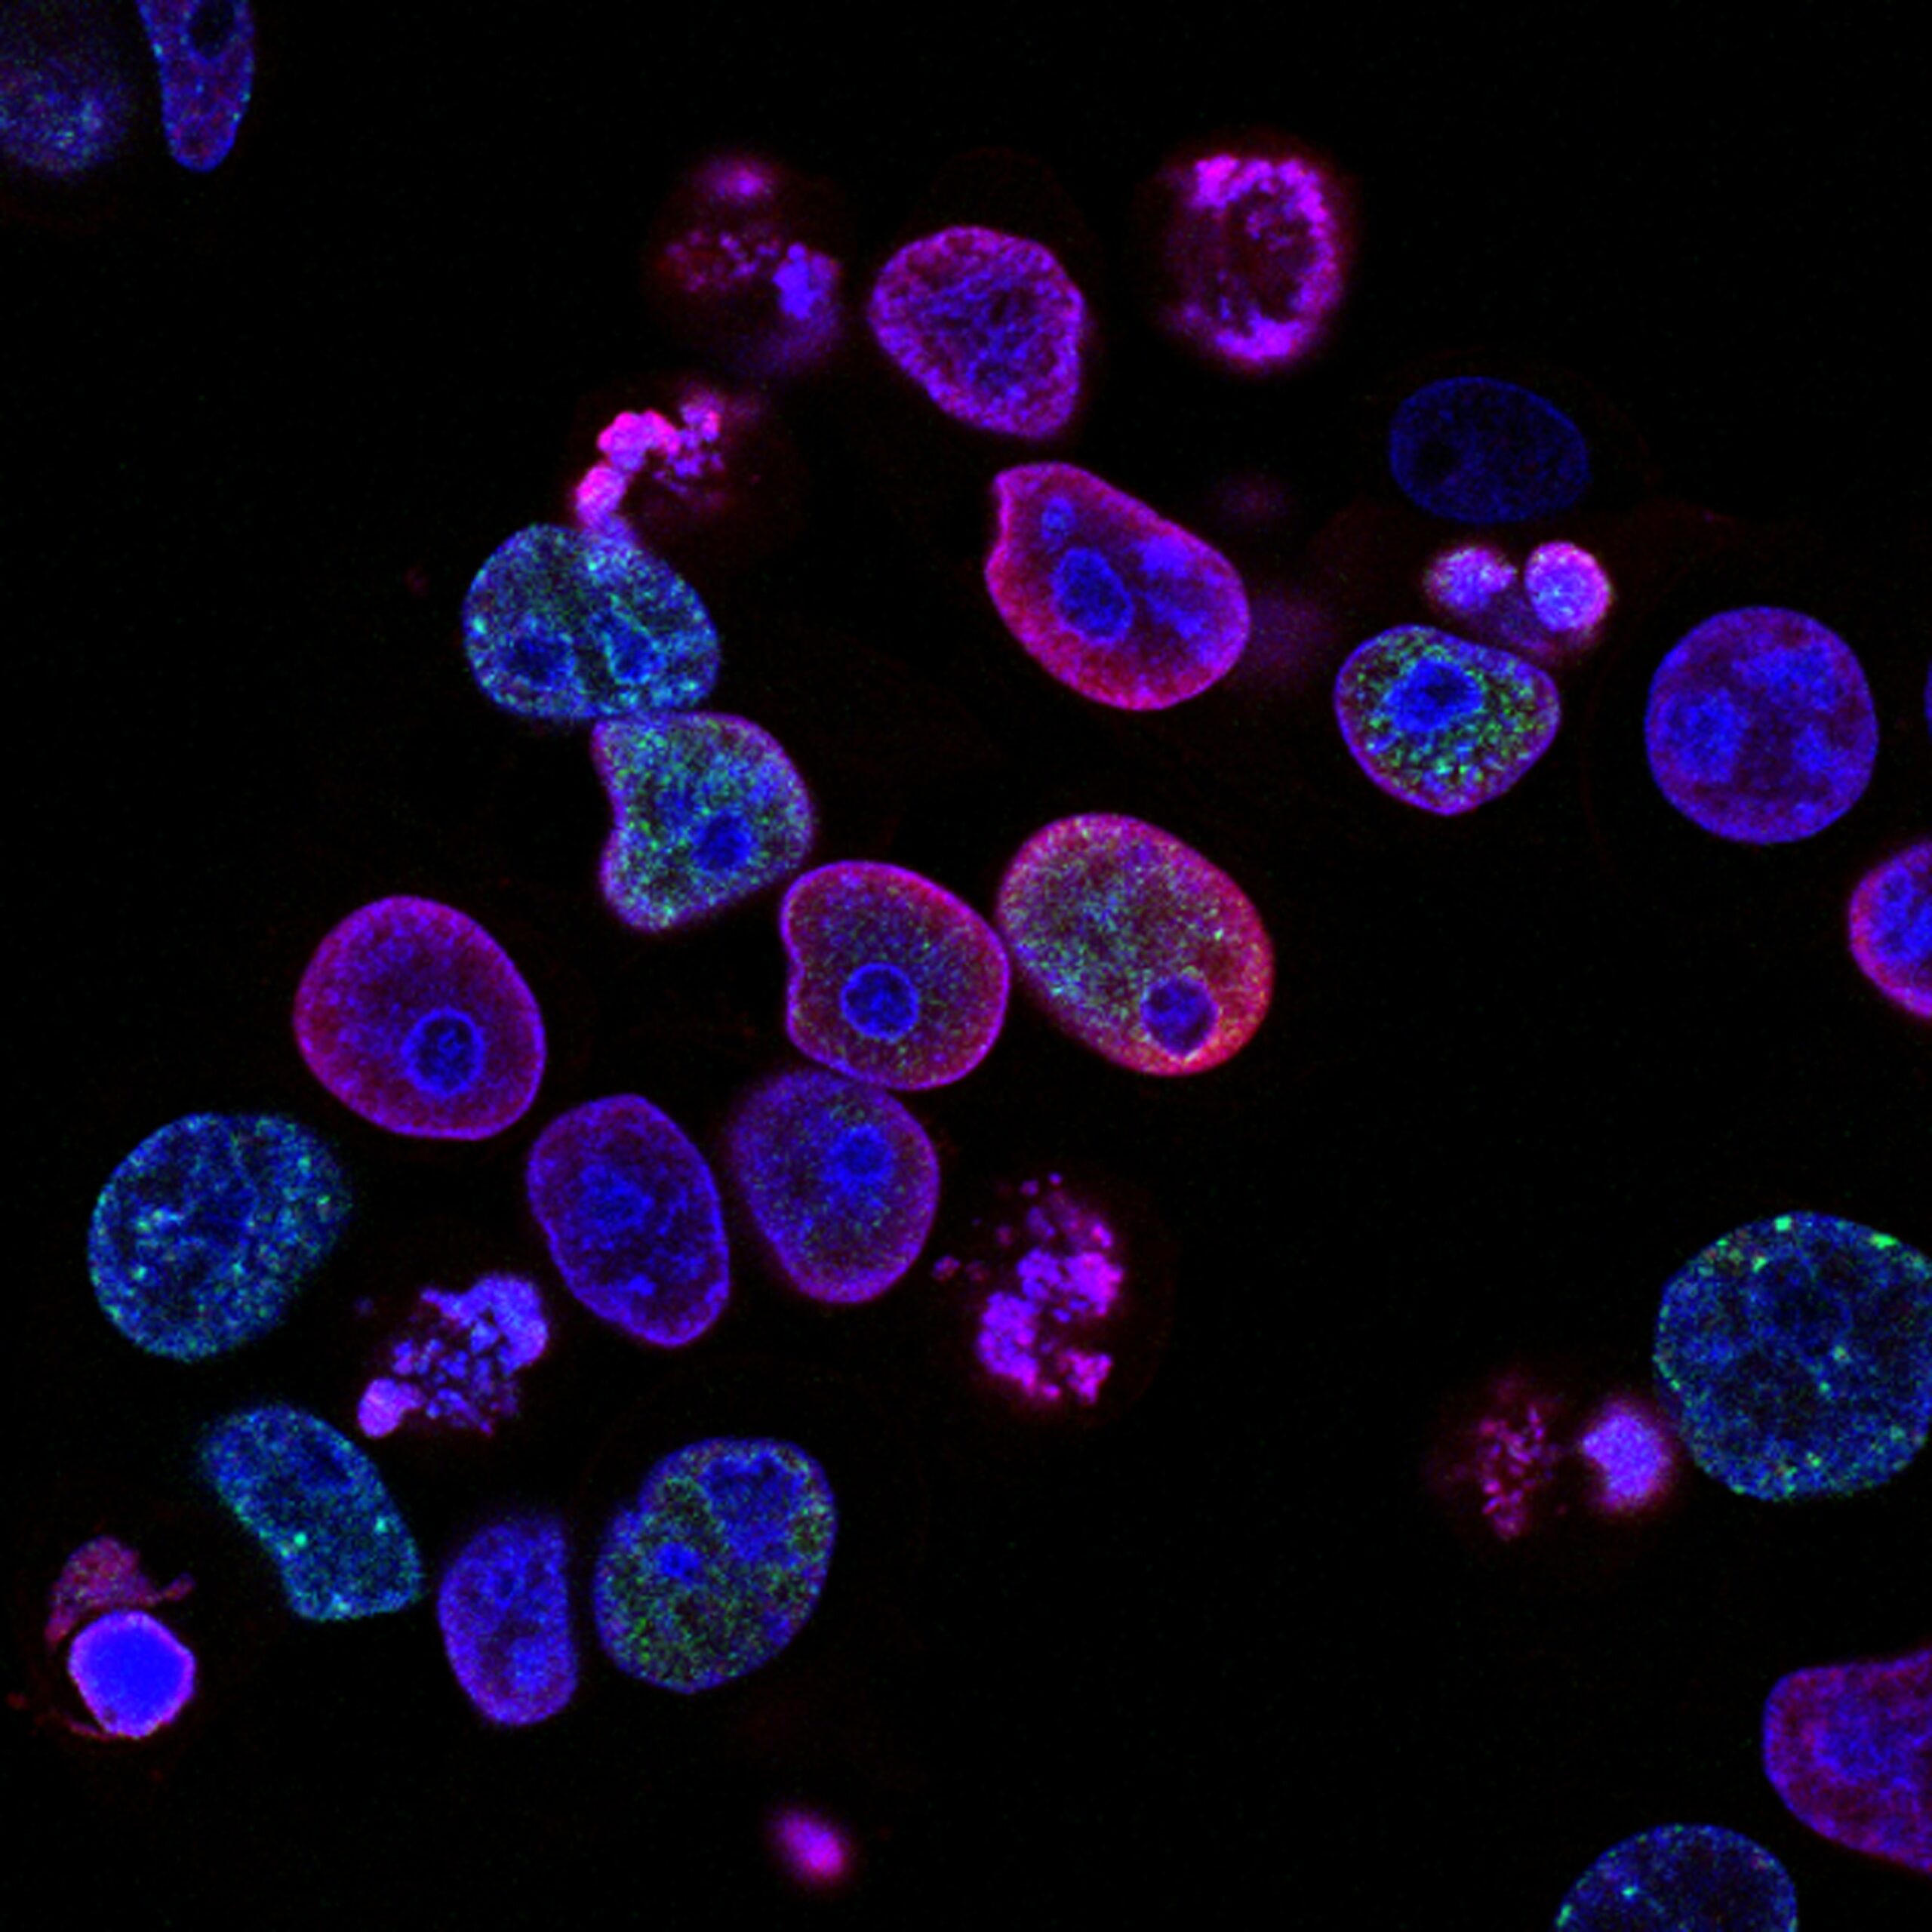 Cell Art by National Cancer Institute Art - Image L7en7Lb-Ovc from Unsplash